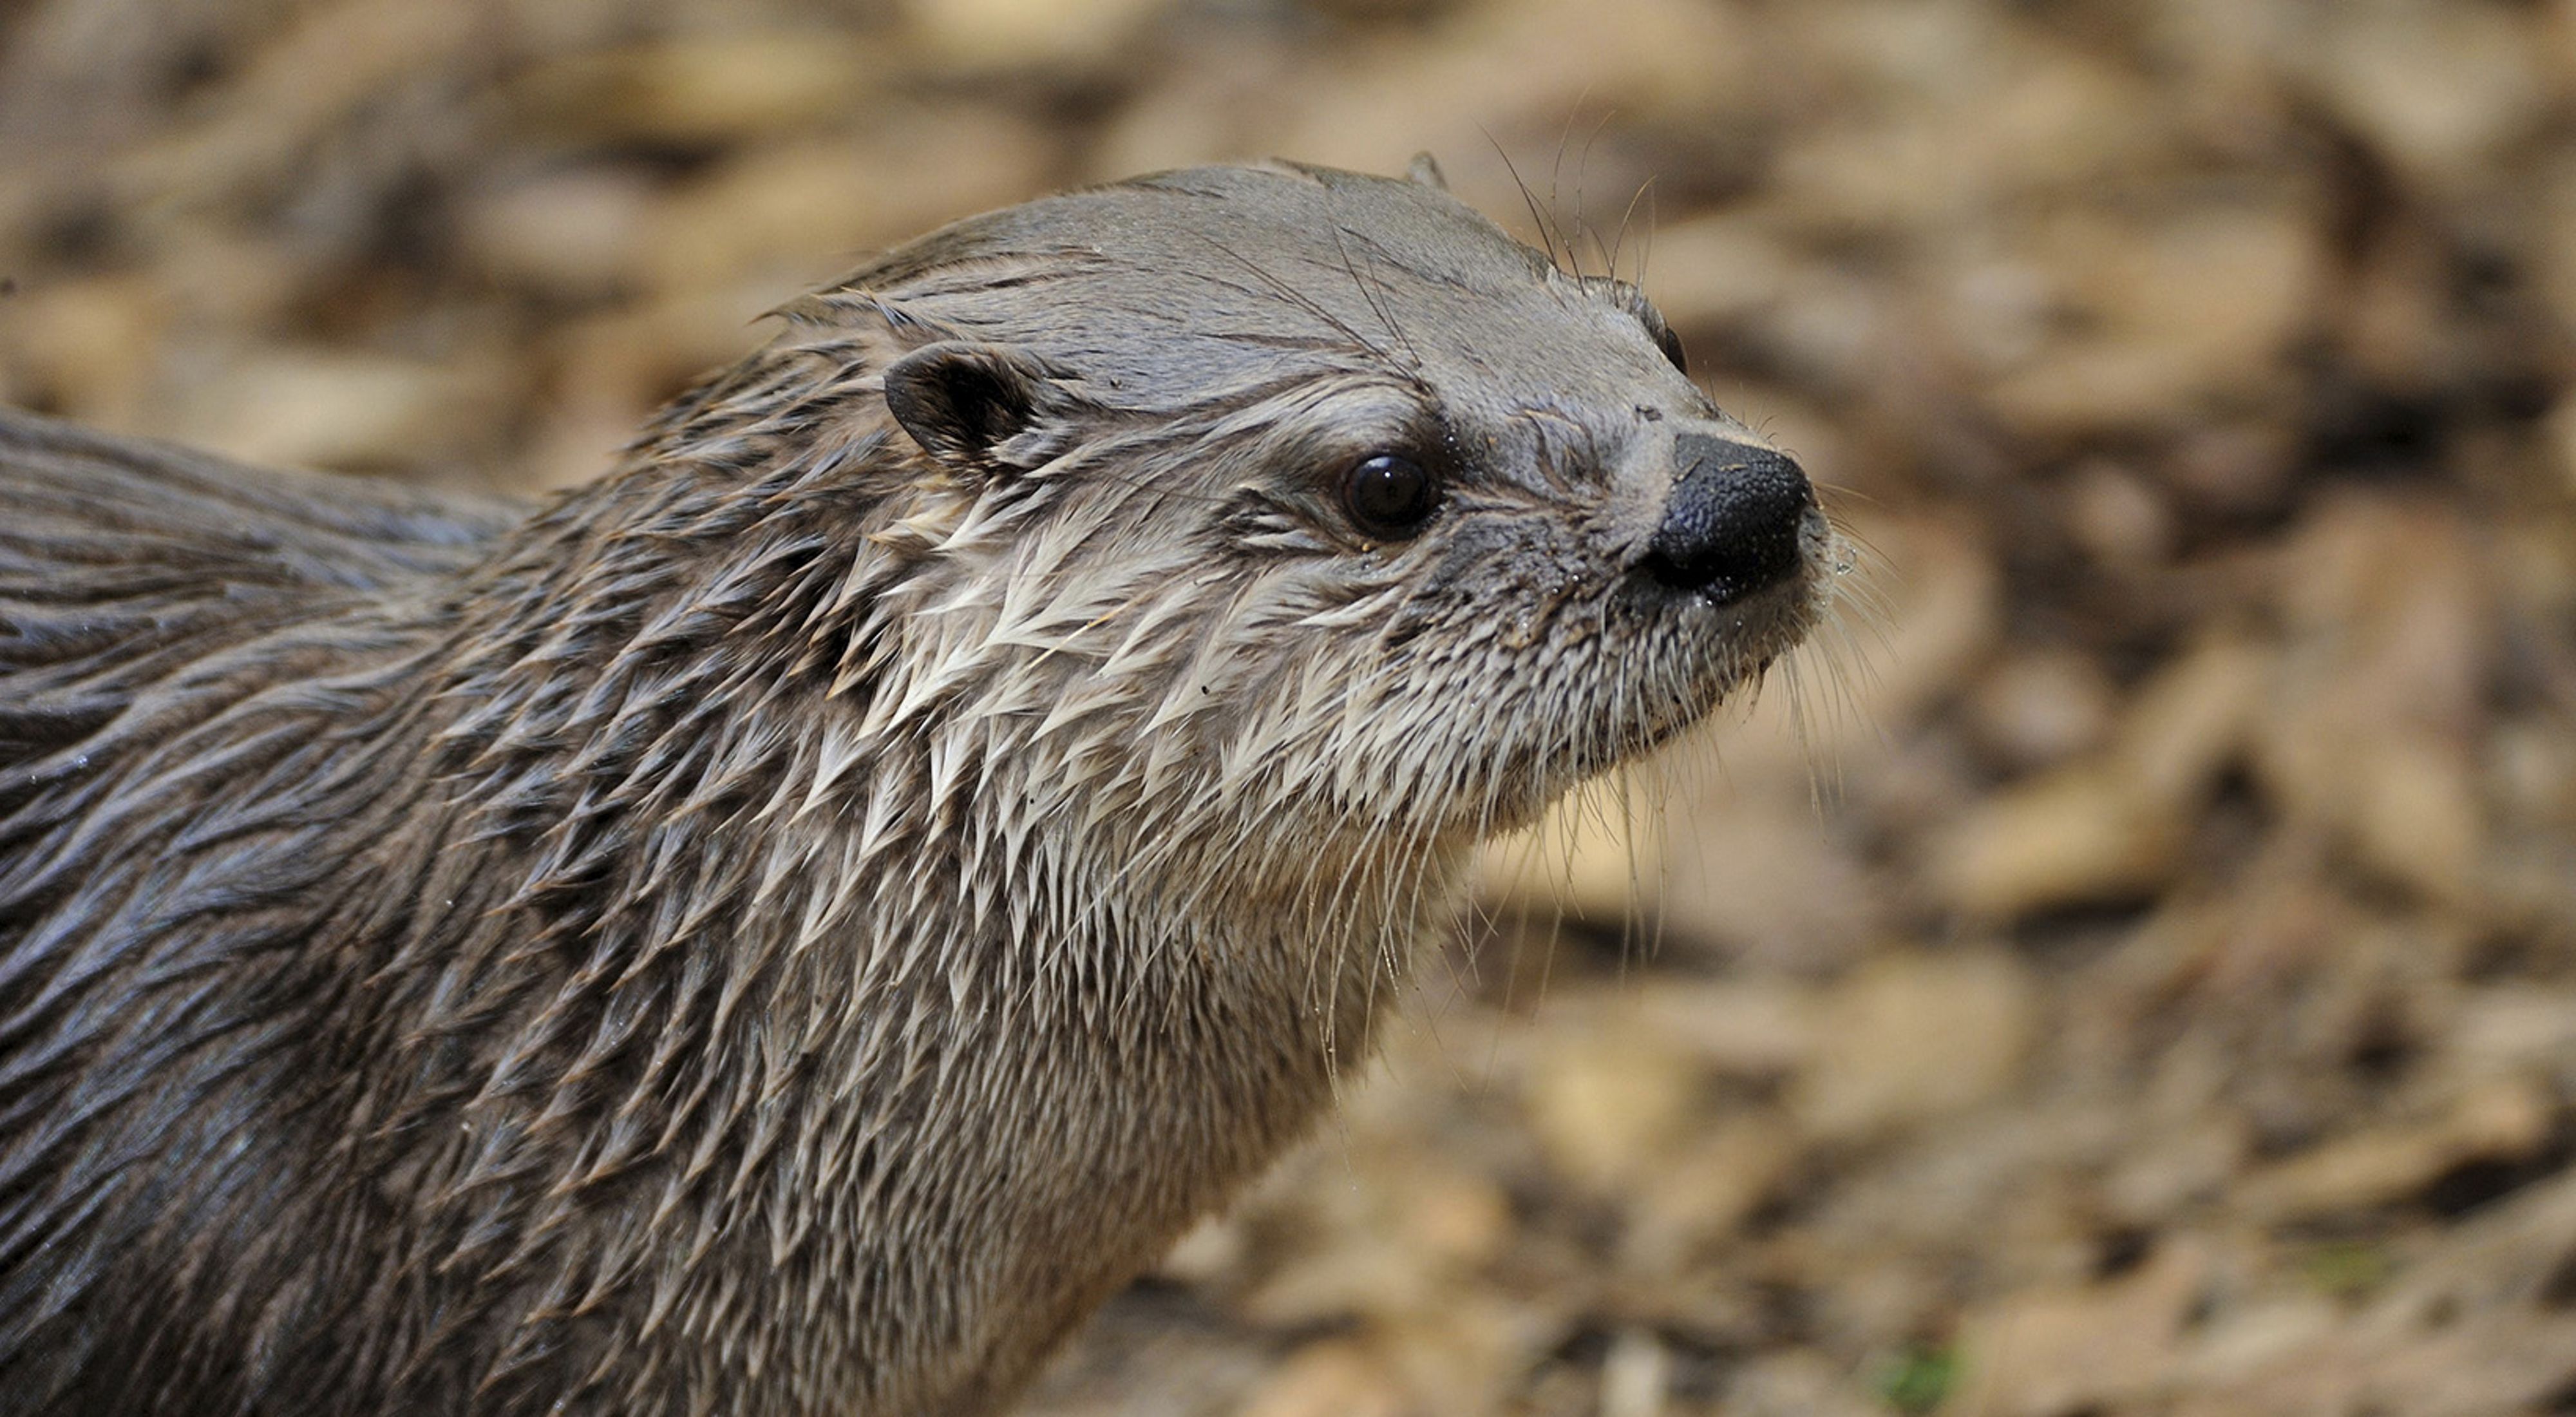 Closeup of a river otter's face.